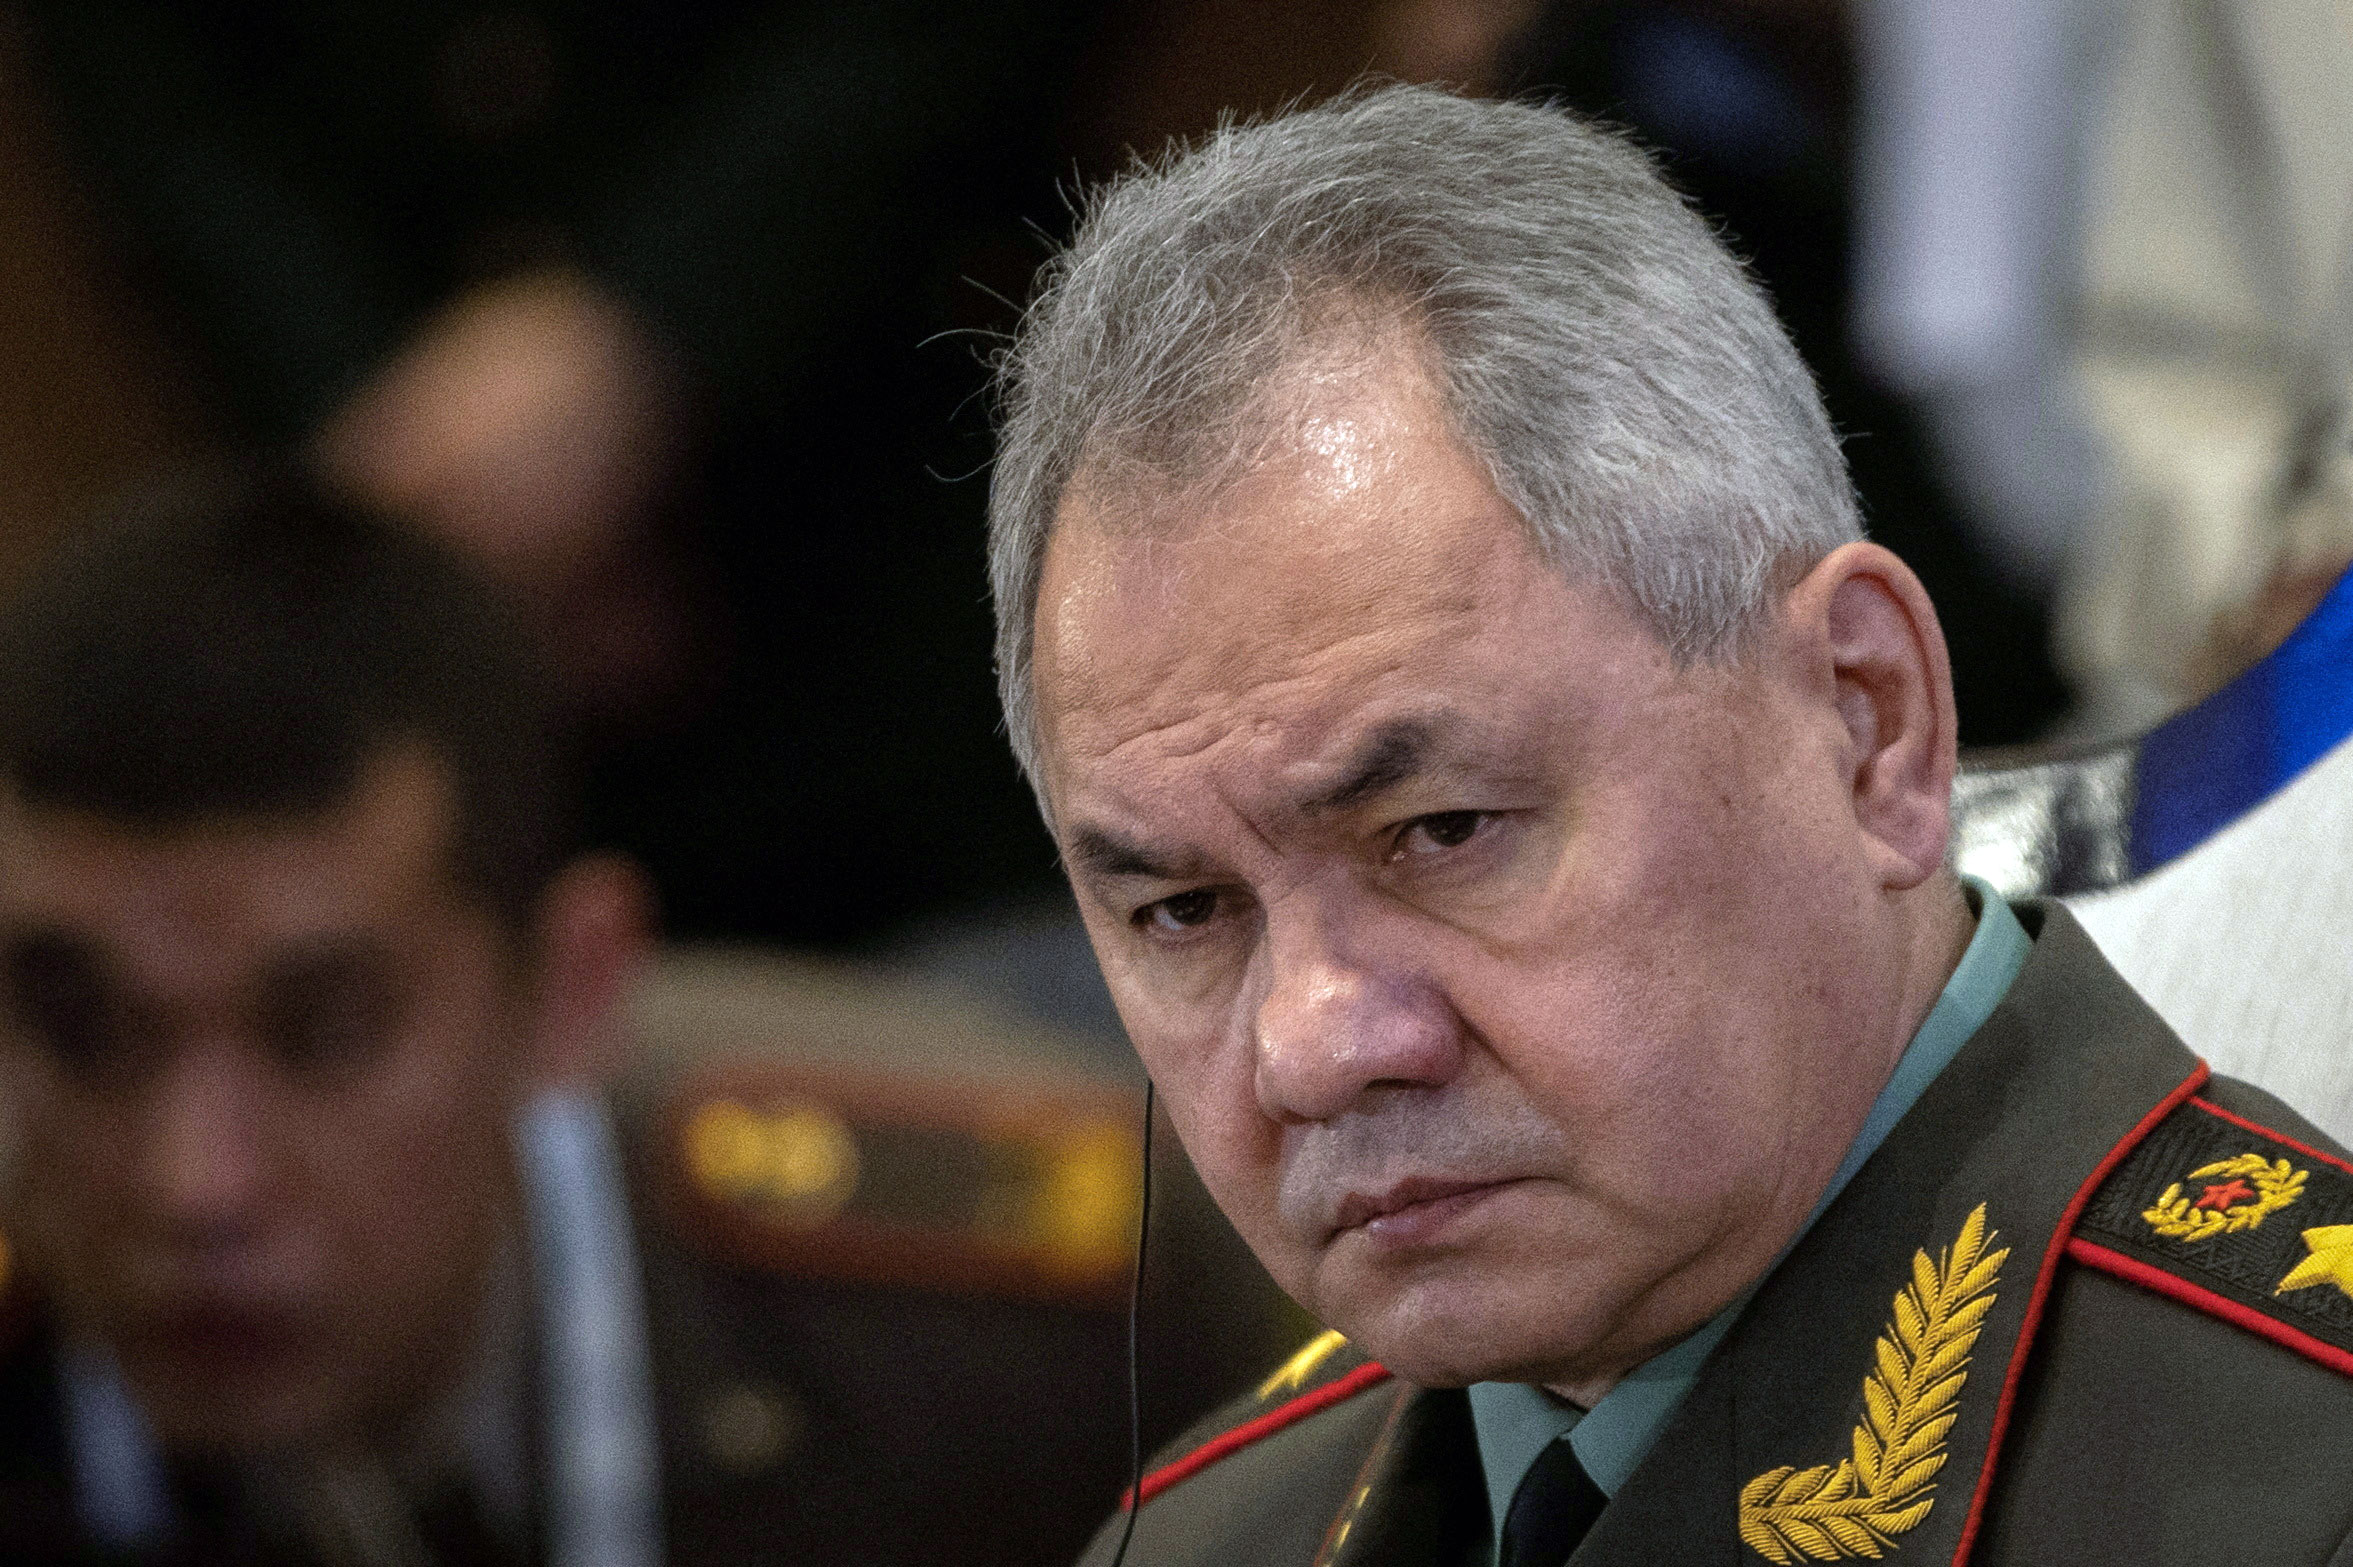 Russian Defense Minister Sergei Shoigu attends the Shanghai Cooperation Organization (SCO) meet in New Delhi, India, on April 28, 2023.